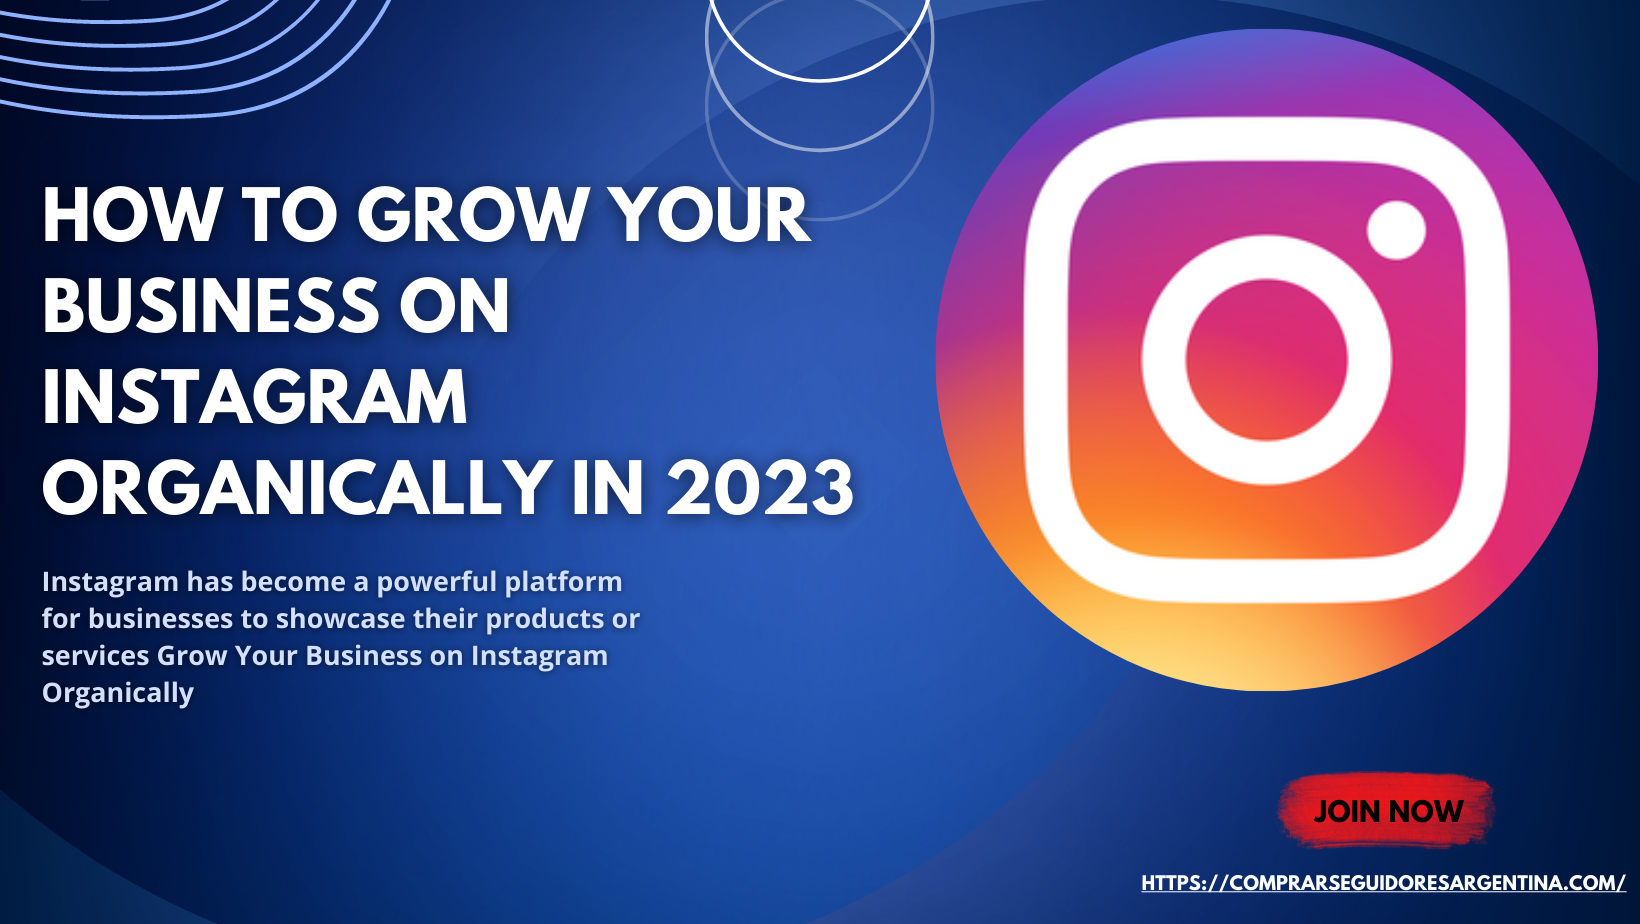 Grow Your Business on Instagram Organically